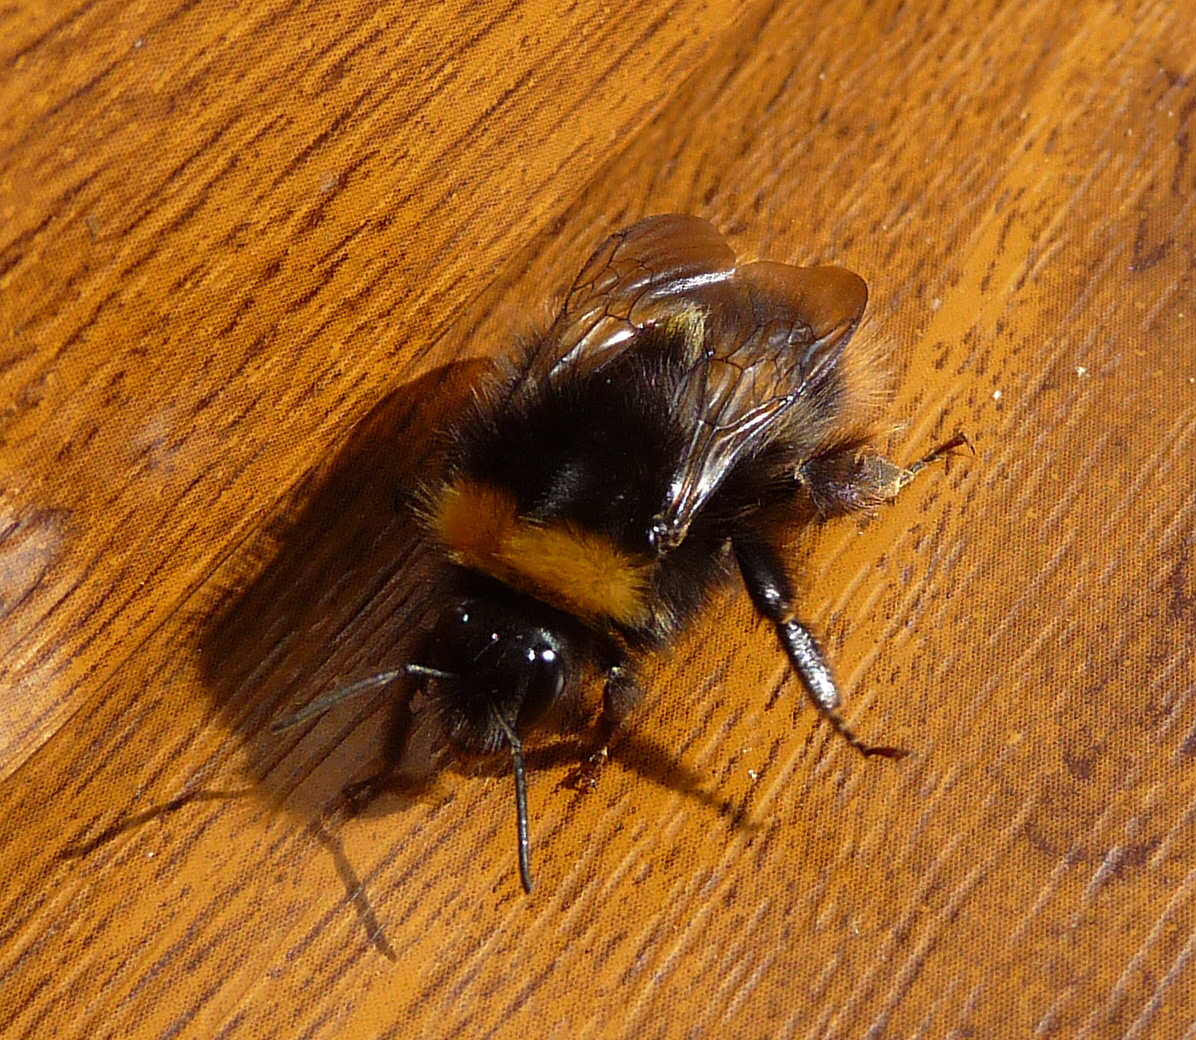 there is a bee that is sitting on the floor